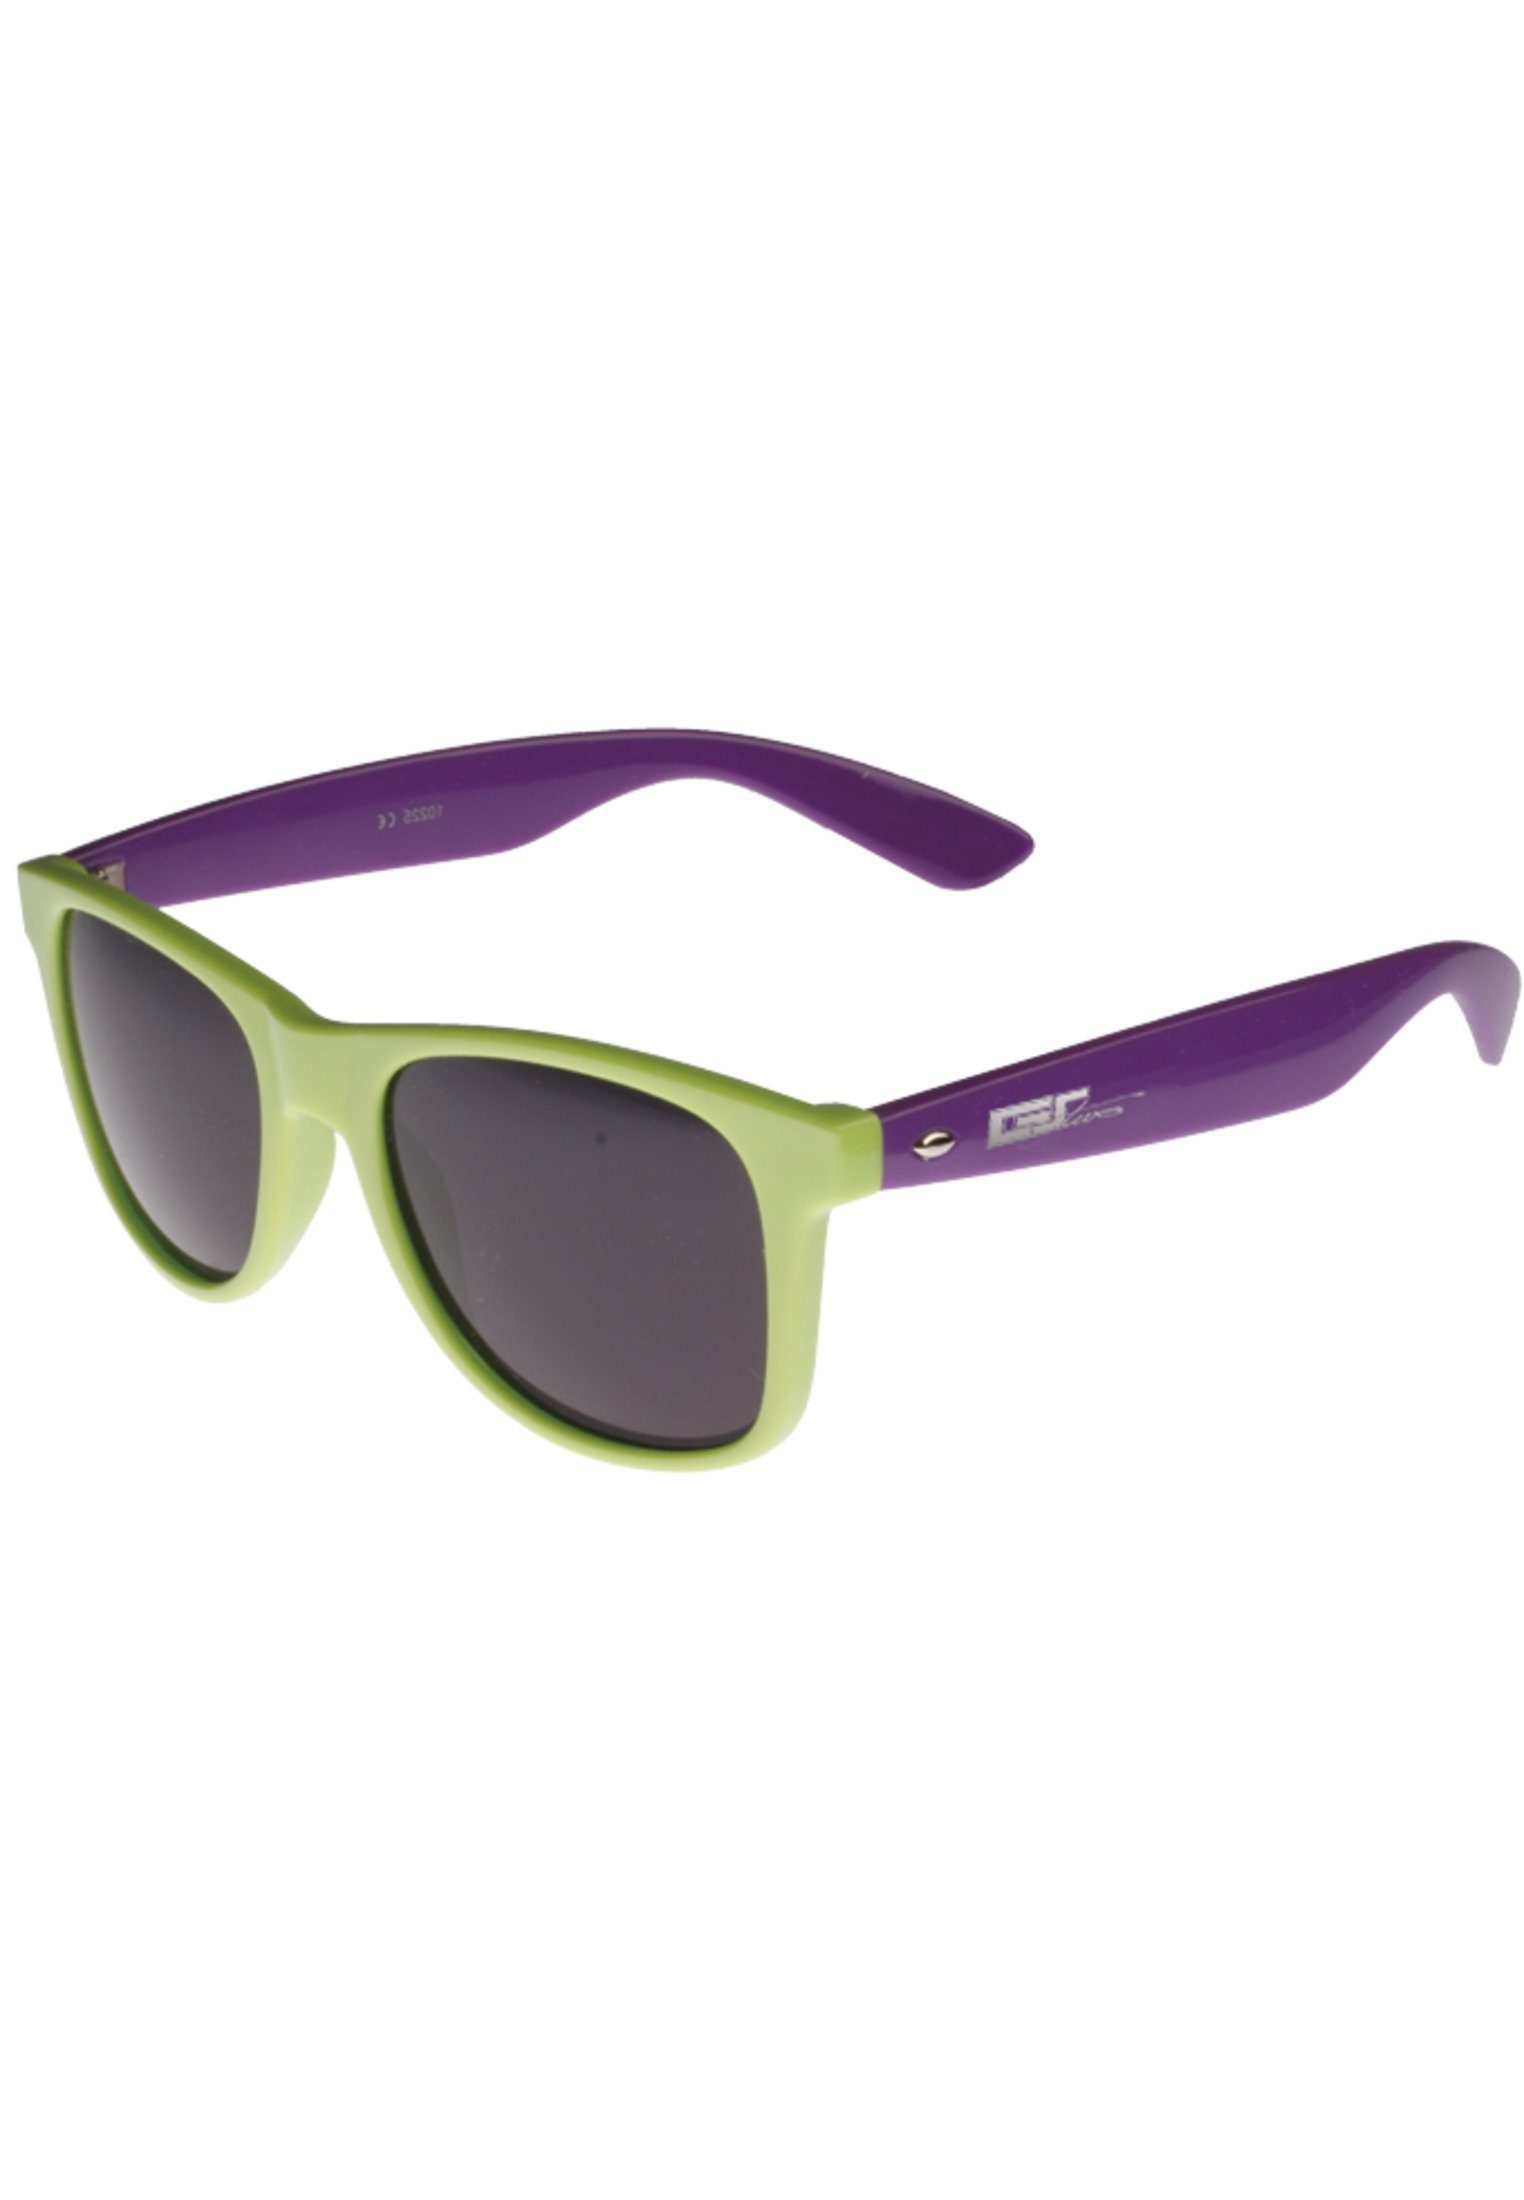 Groove MSTRDS GStwo limegreen/purple Accessoires Sonnenbrille Shades